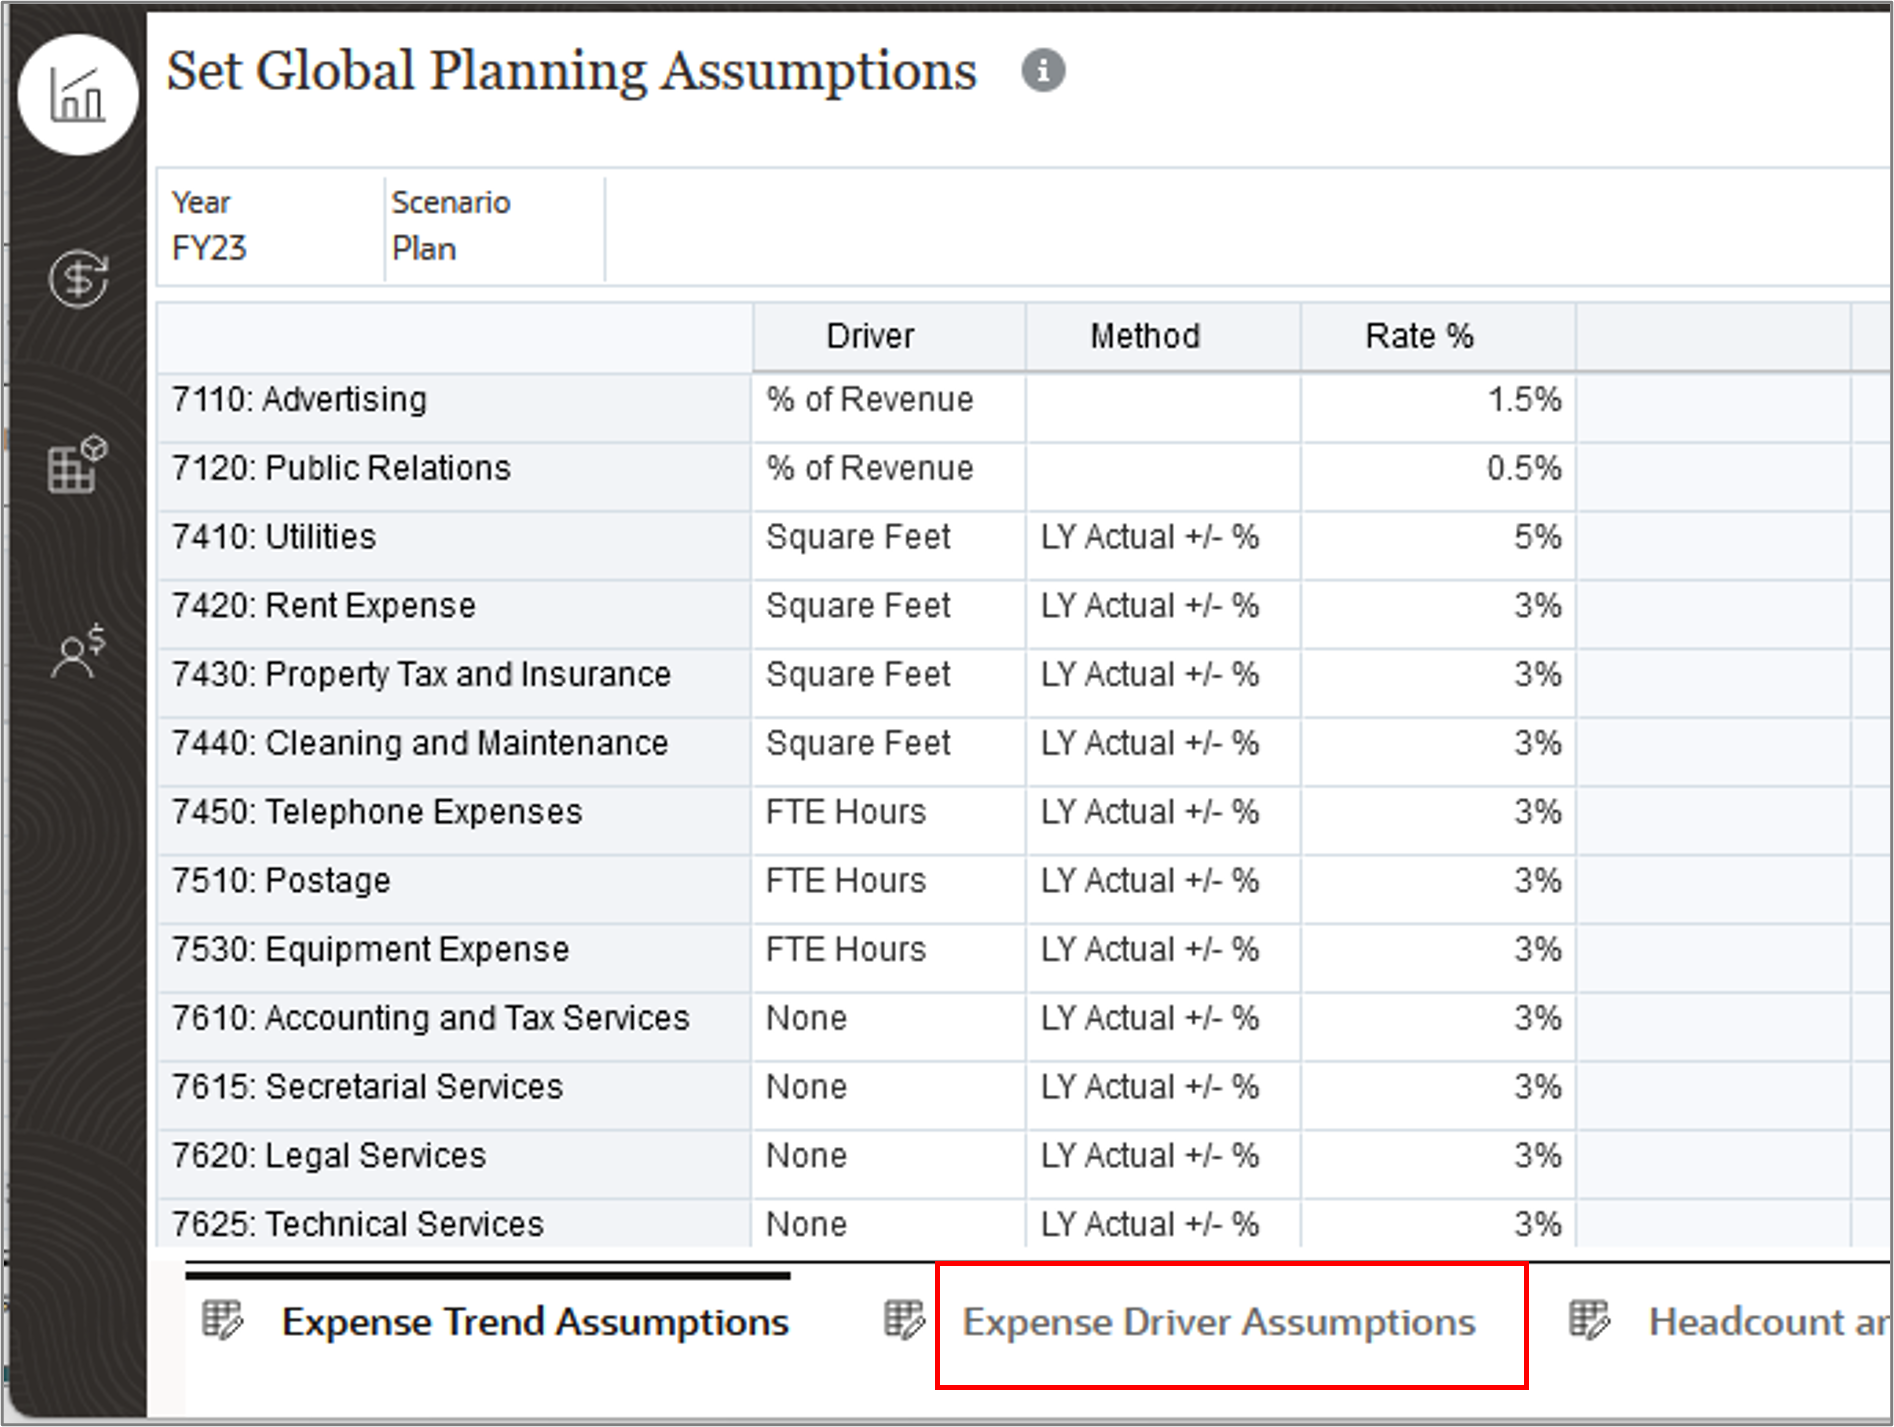 Set Global Planning Assumptions form with Expense Driver Assumptions Highlighted